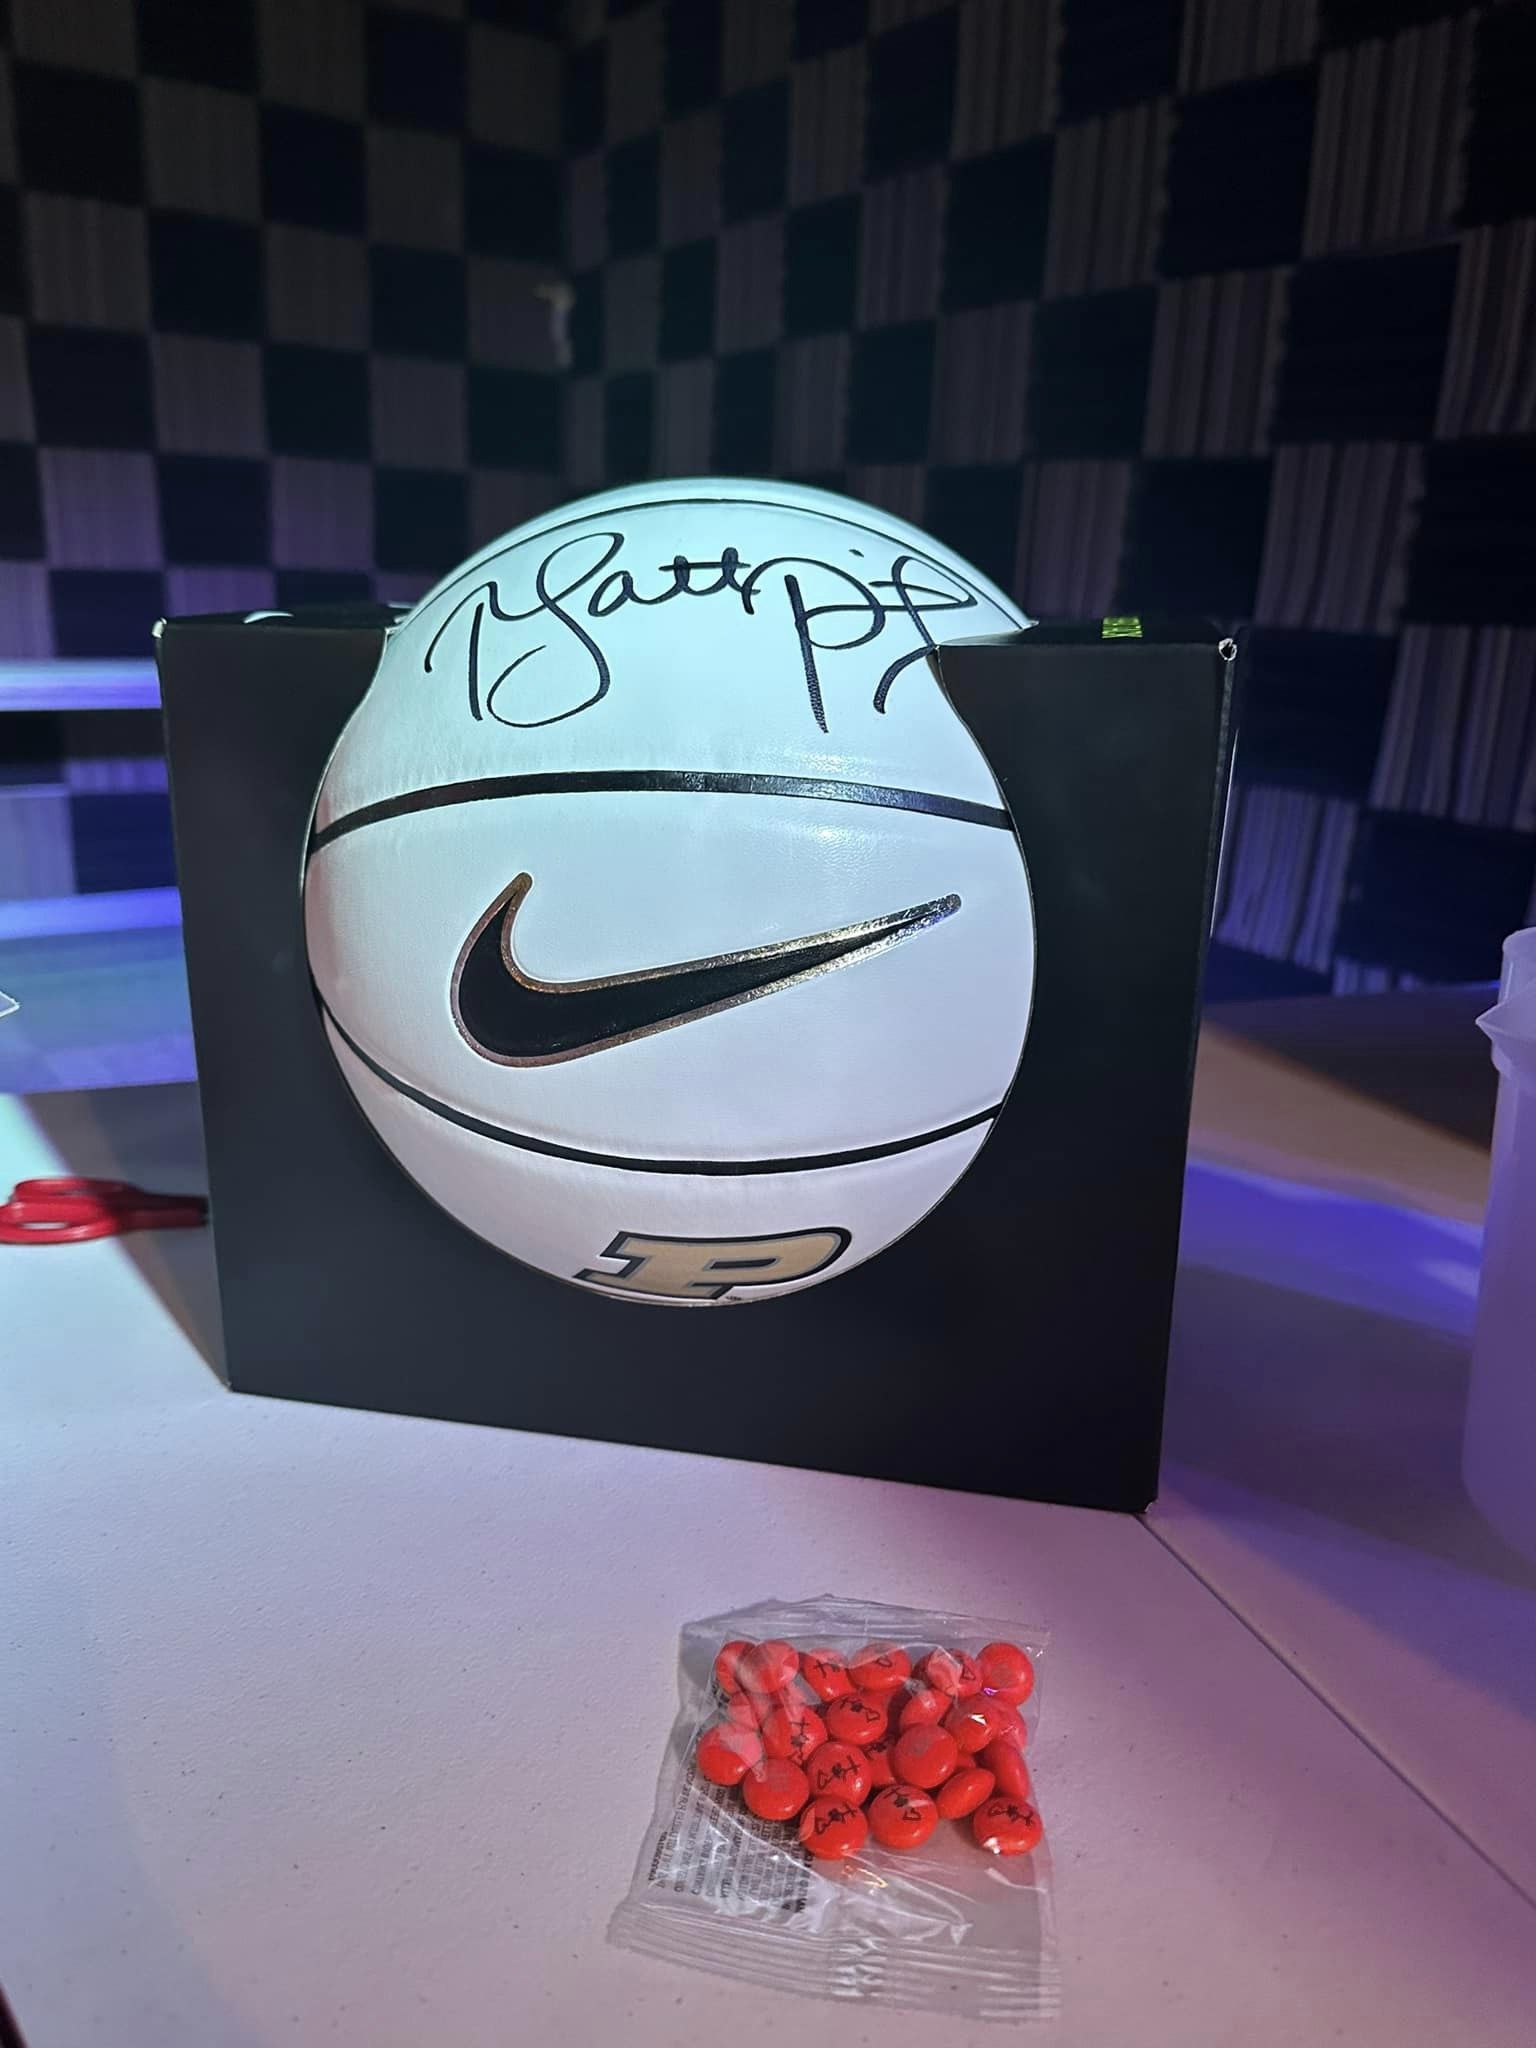 A signed basketball